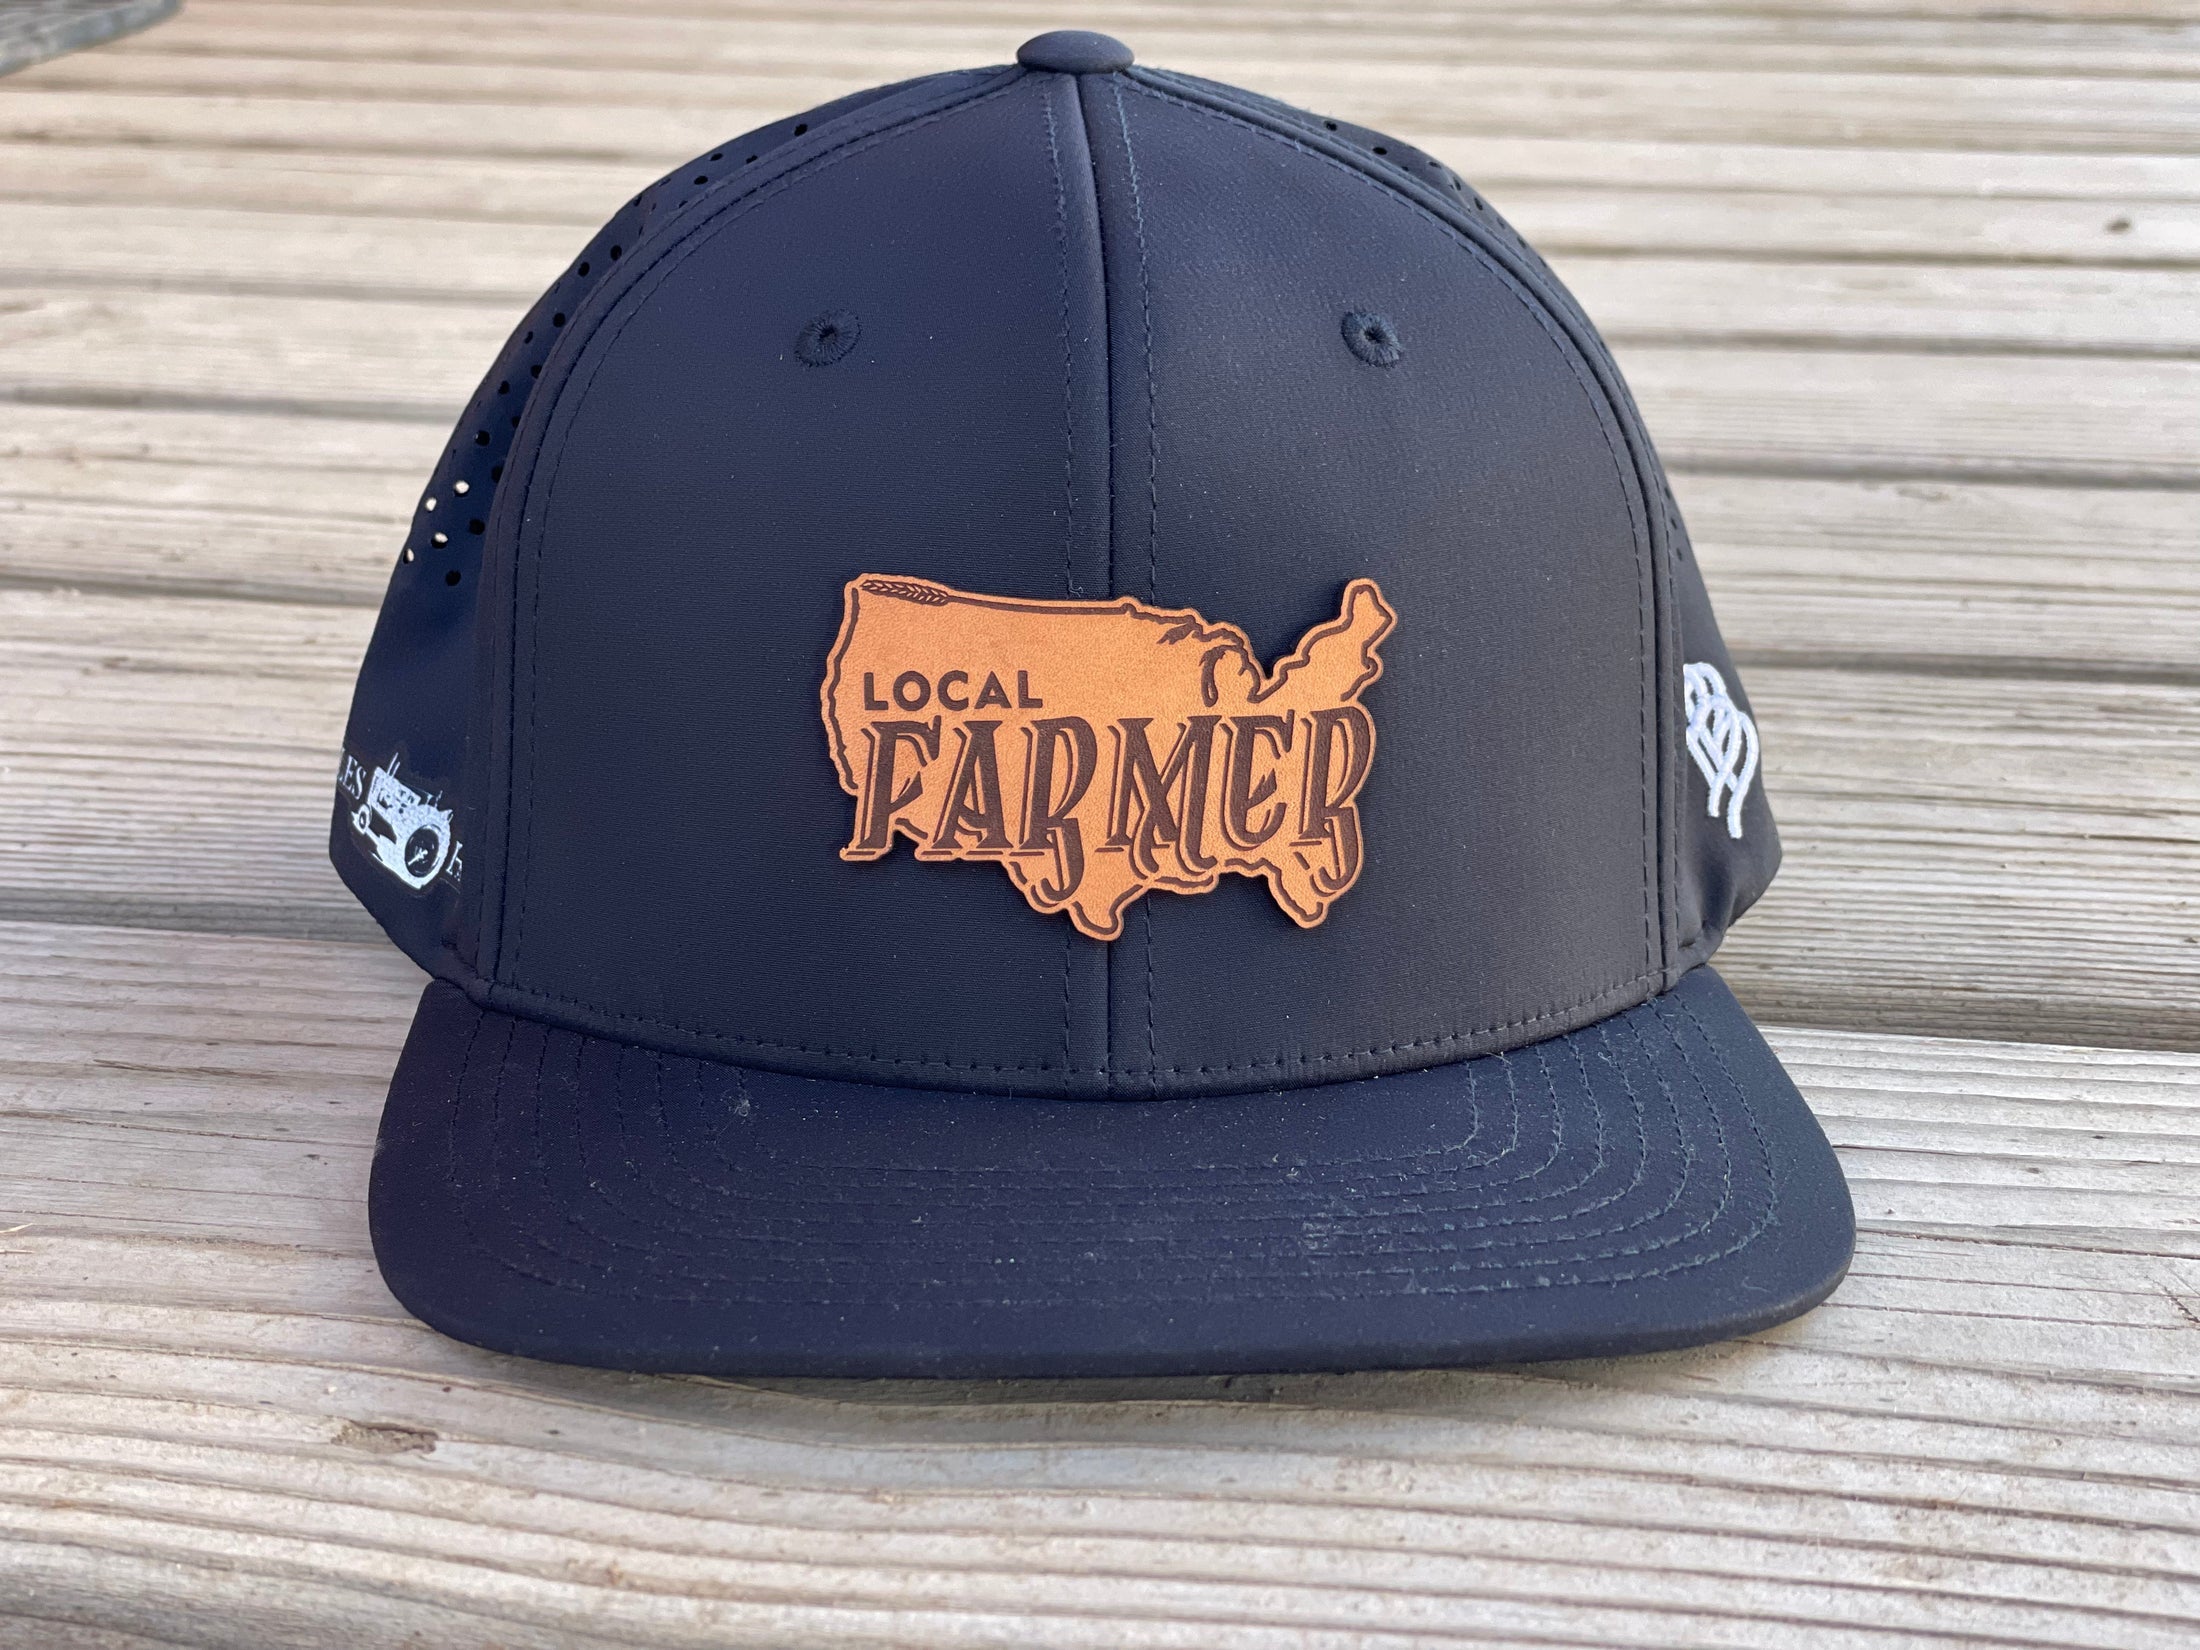 Local Farmer Brand Leather Patch Performance Hat